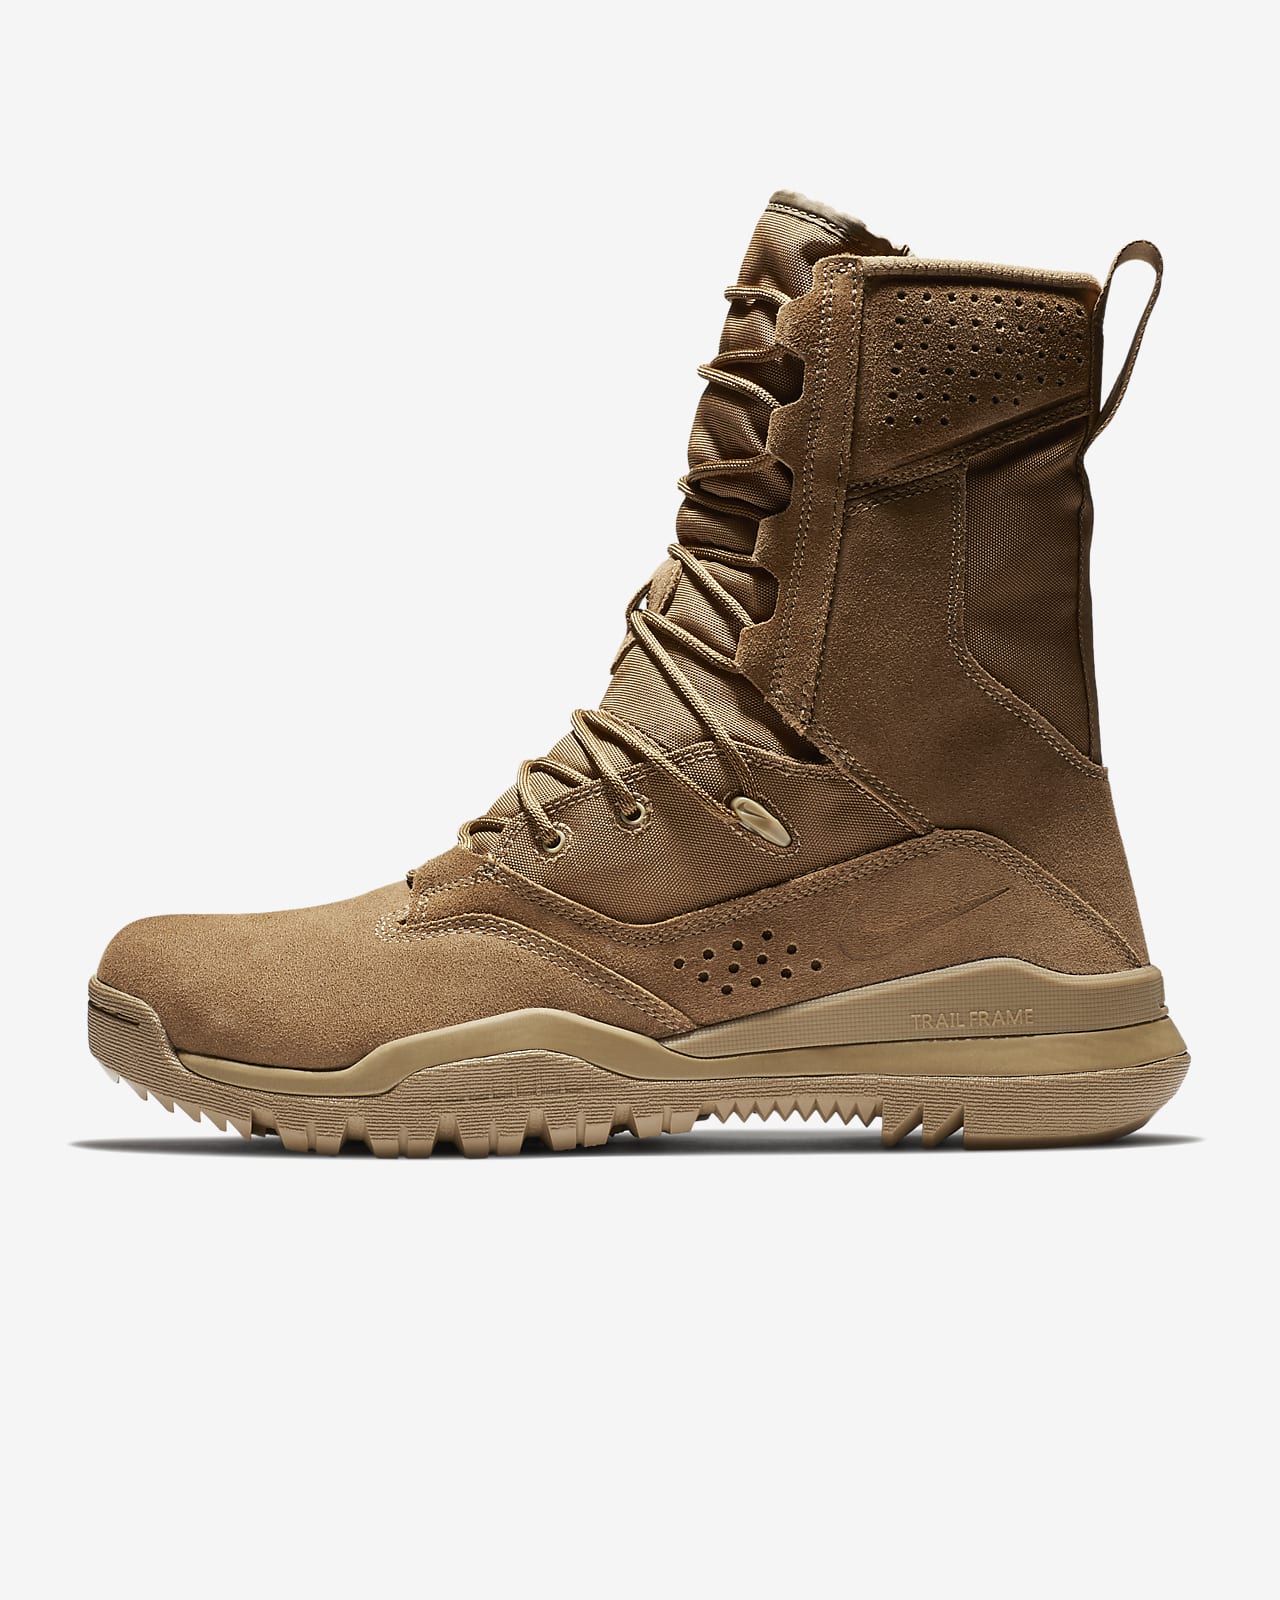 Nike Sfb Field 2 8 Leather Tactical Boot Nike Com Buy police boots for men and get the best deals at the lowest prices on ebay! nike sfb field 2 8 leather tactical boot